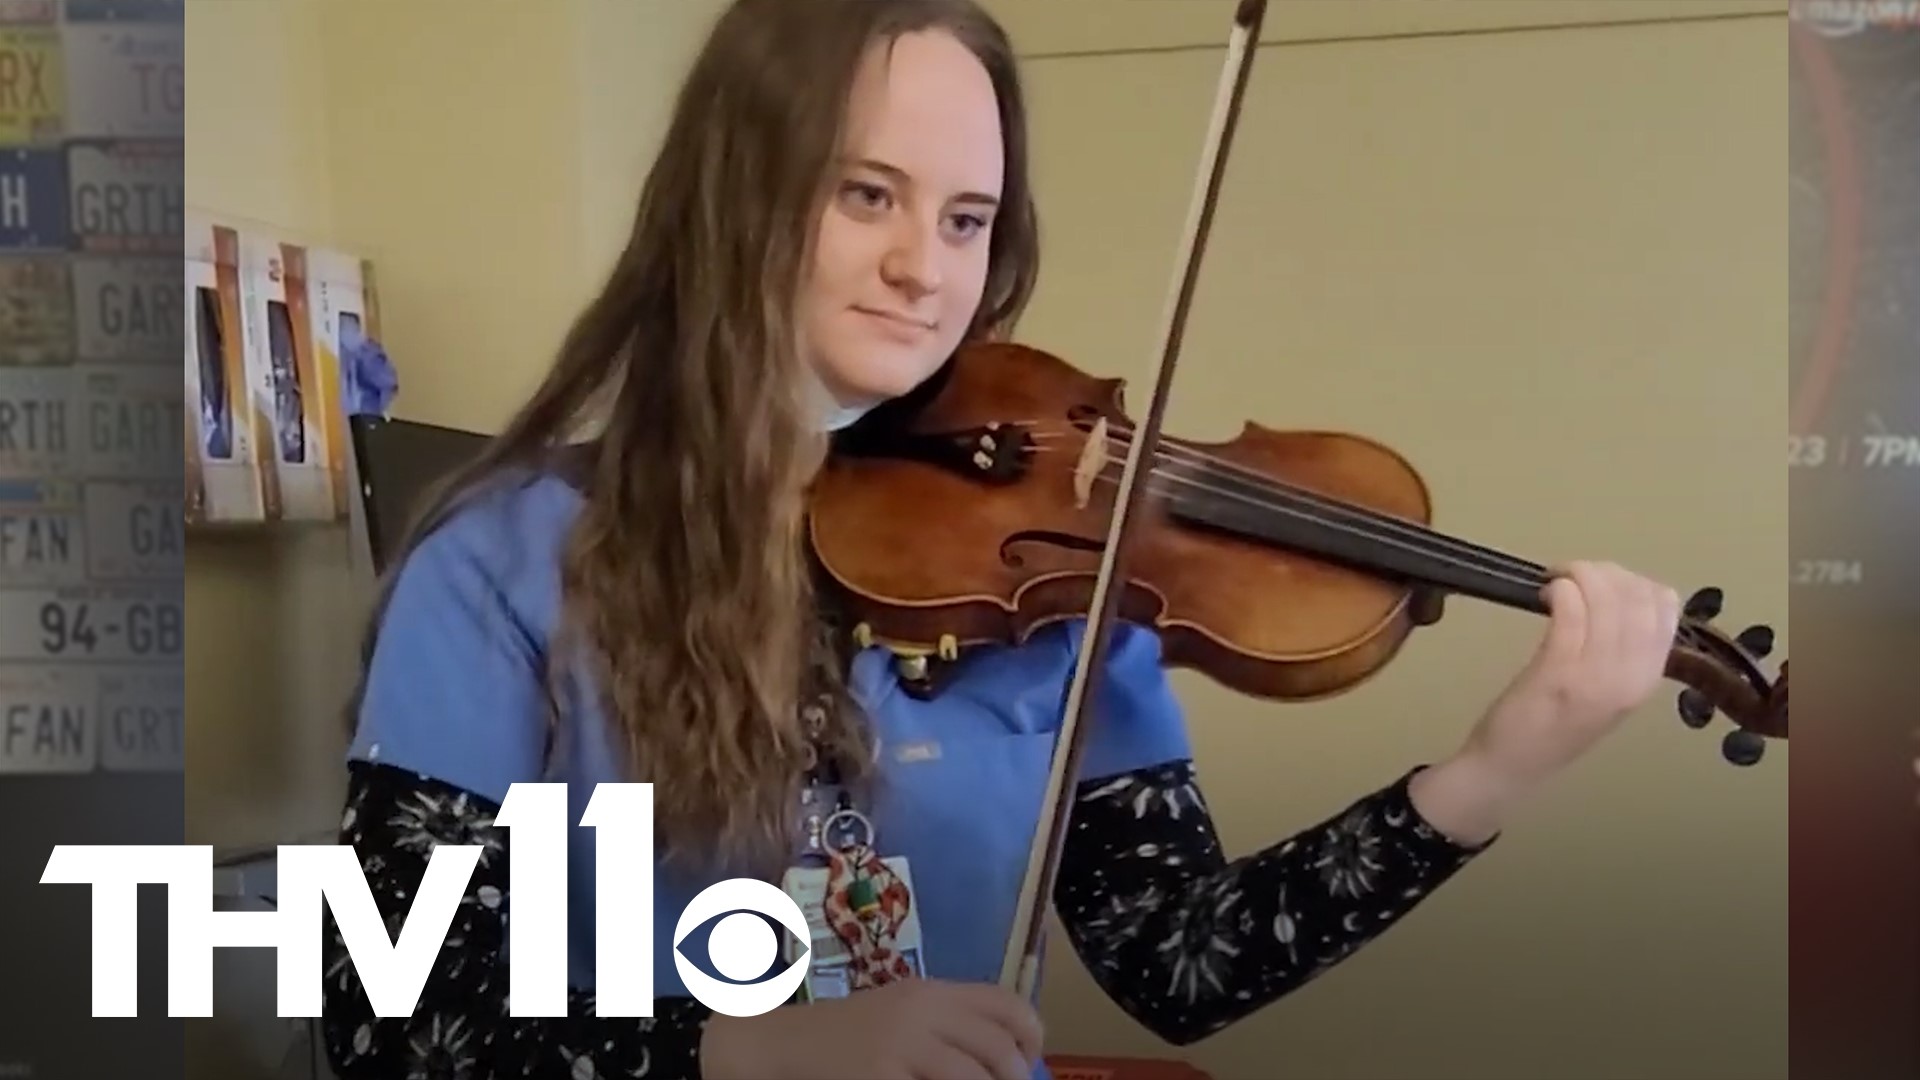 Annie McWilliams, nurse at CHI St. Vincent, was seen playing Amazing Grace on the violin for a patient in the hospital.